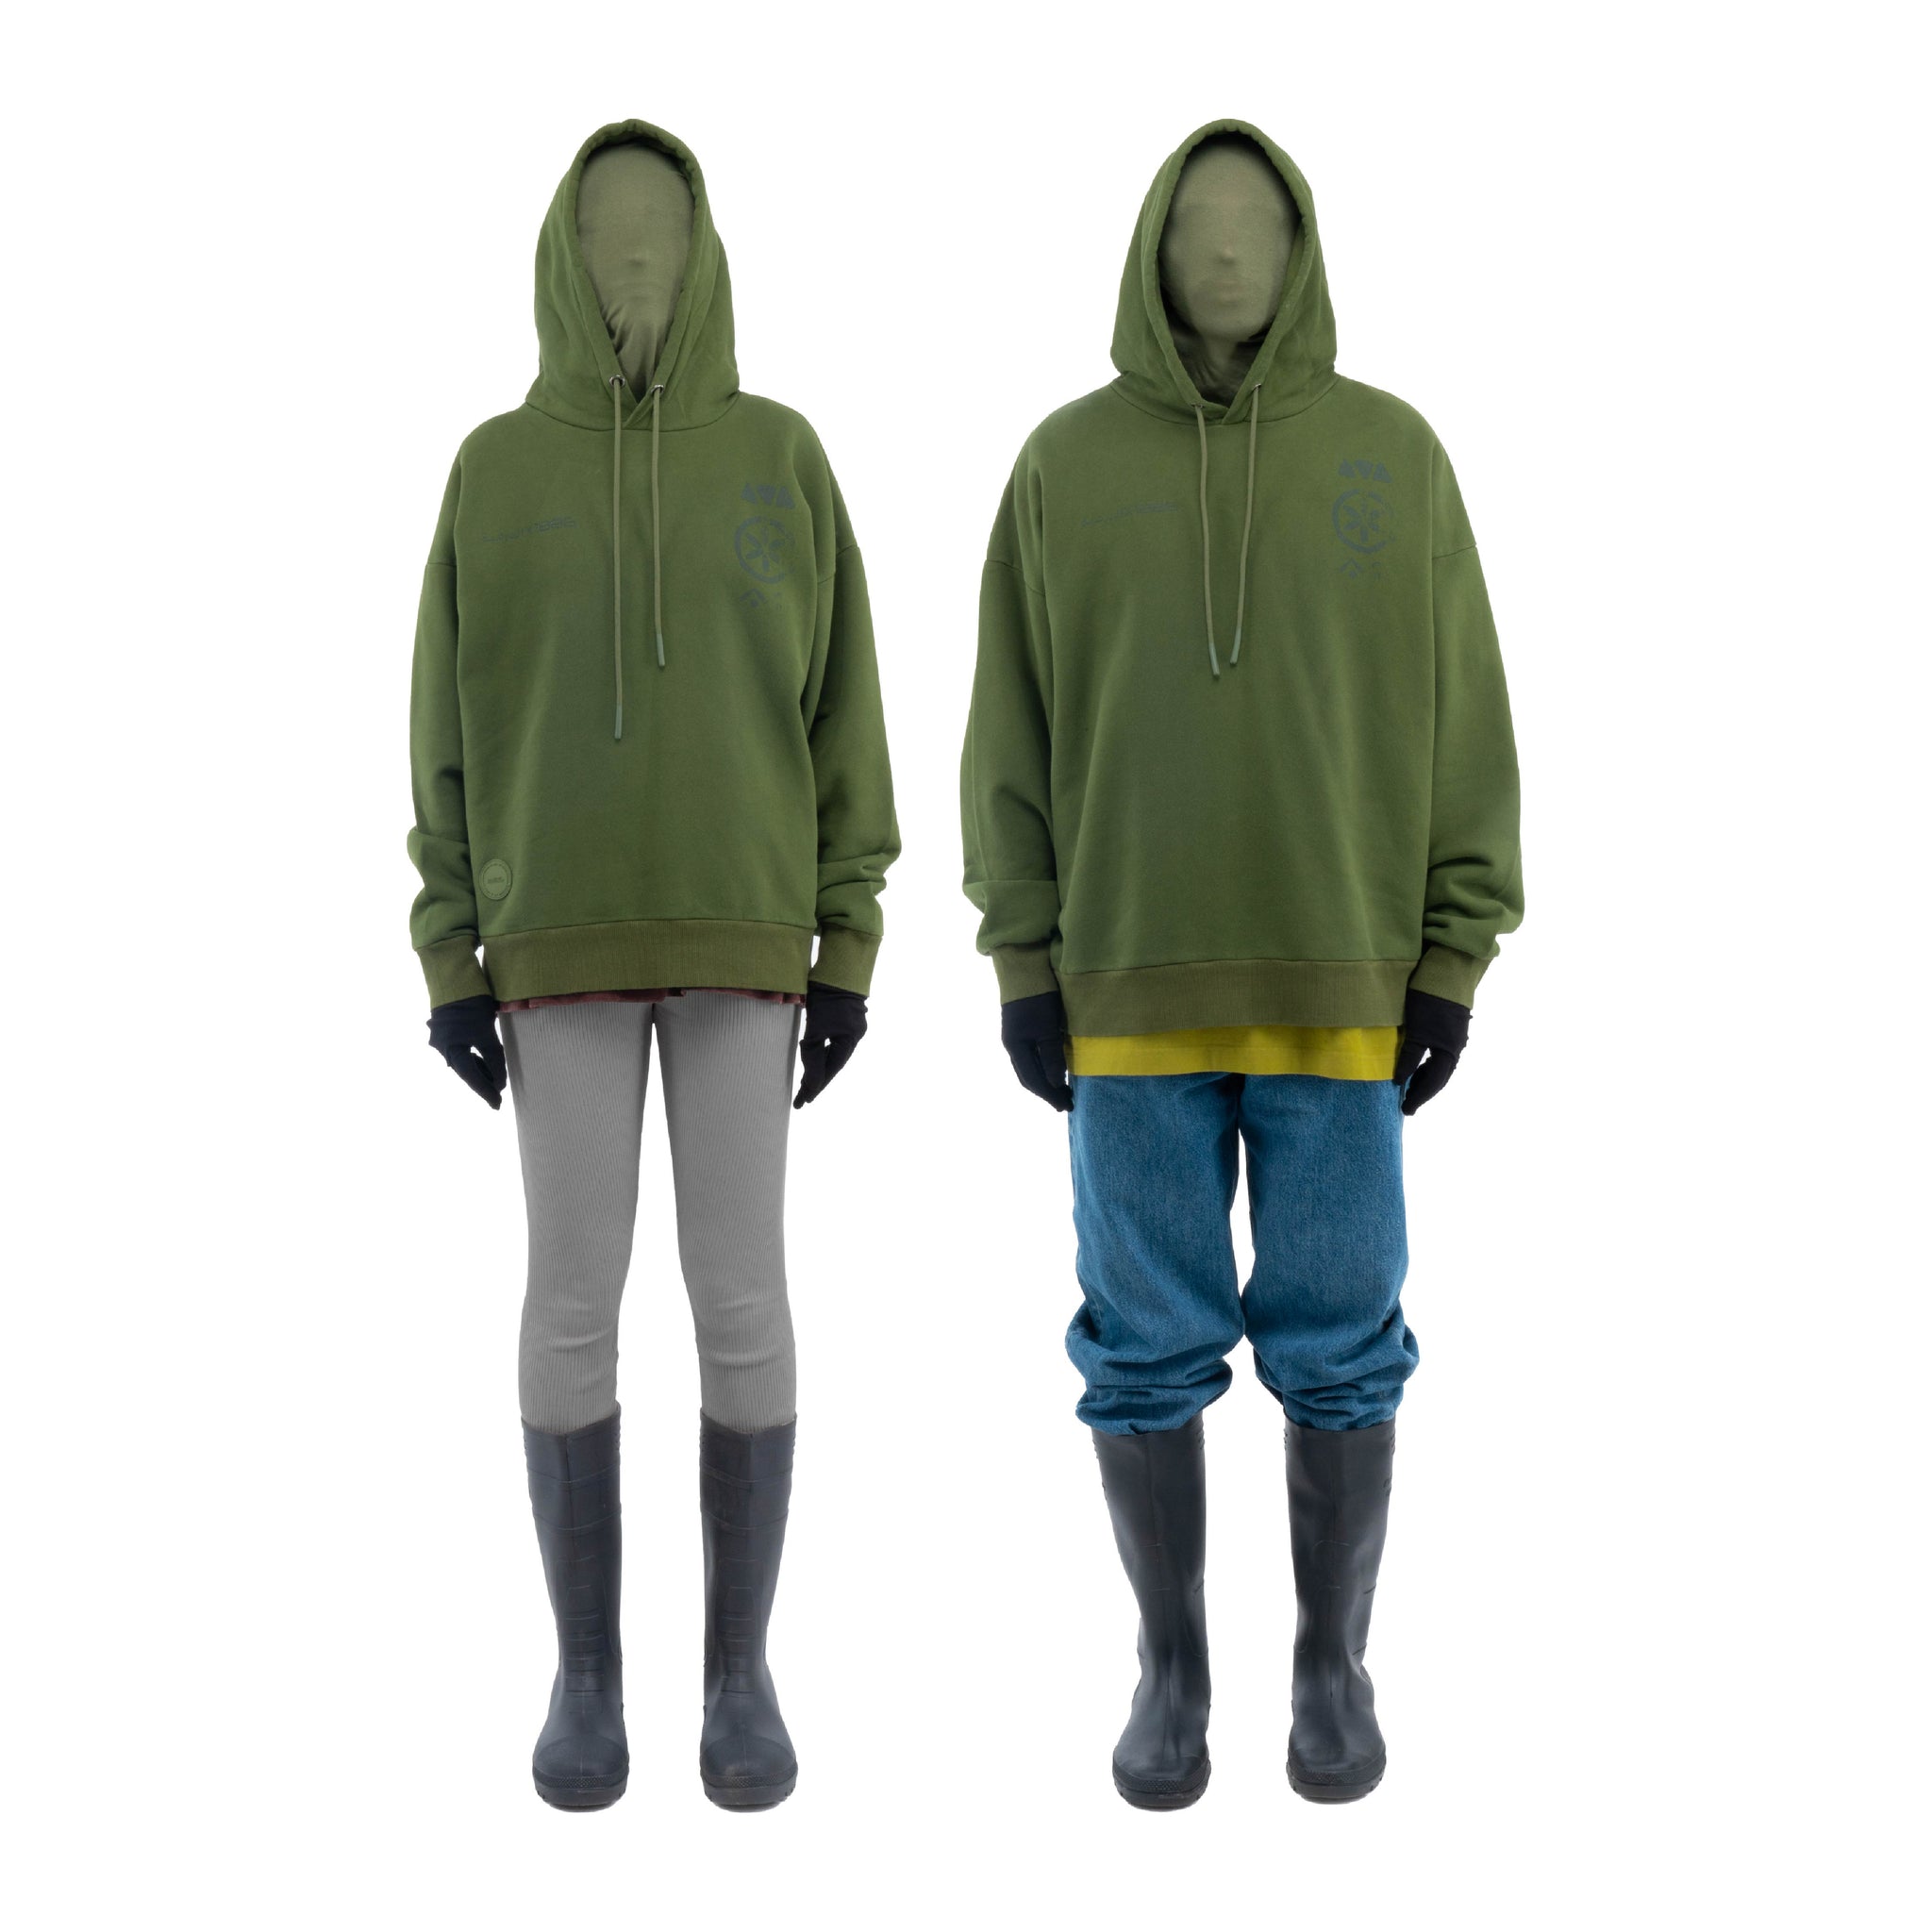 AT-TURAIF OVERSIZED HOODIE - GREEN